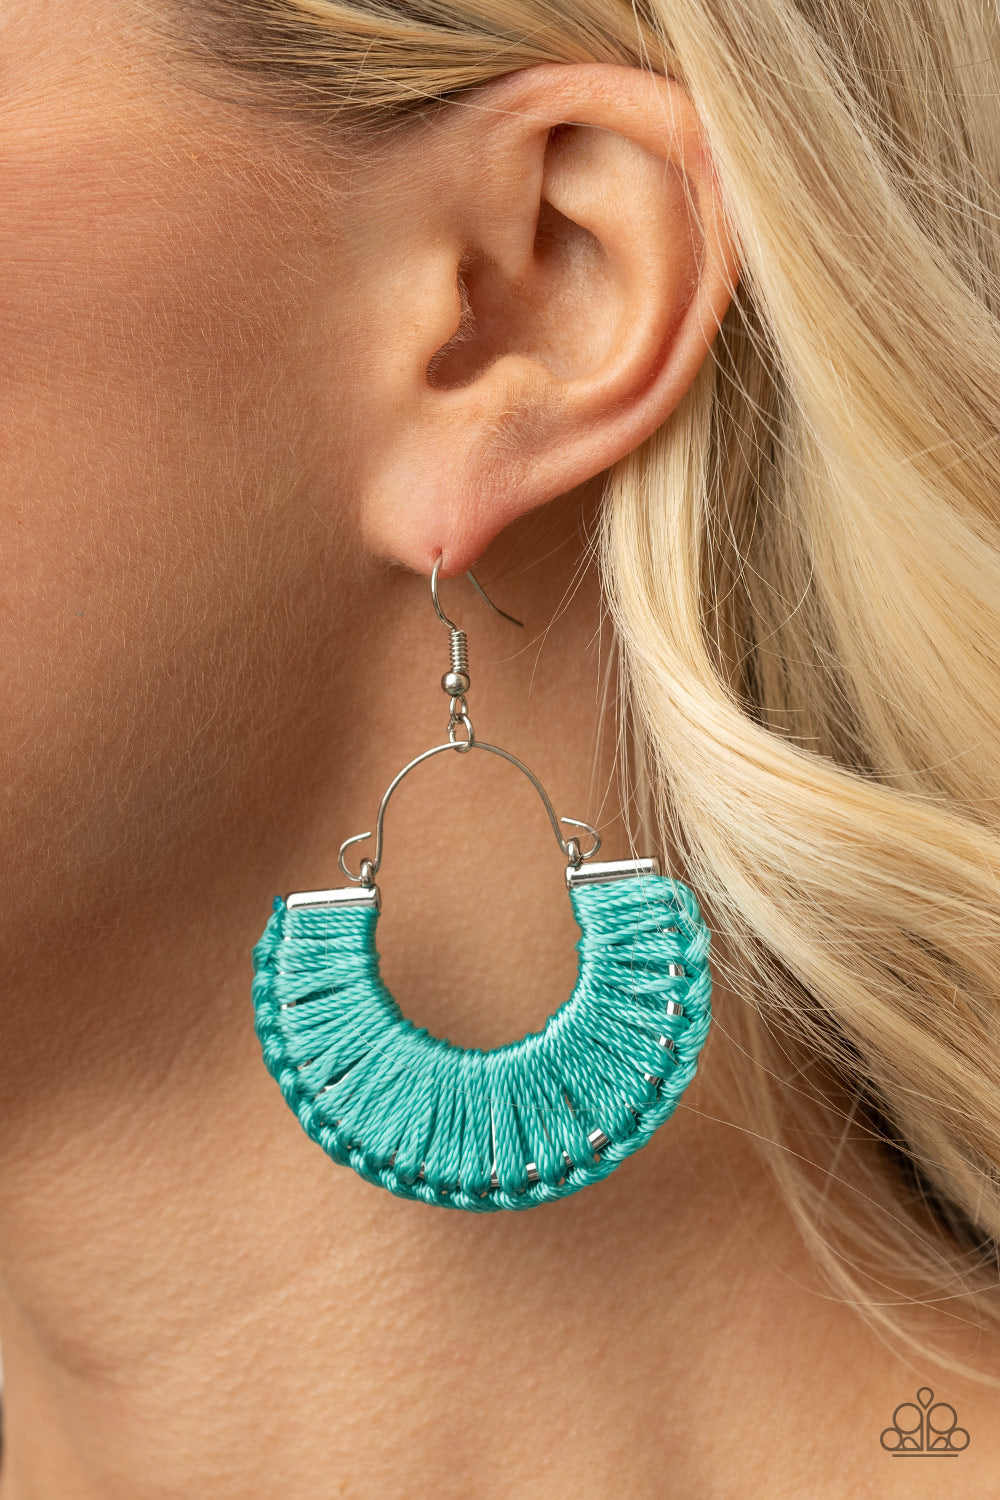 Threadbare Beauty Blue Earring - Paparazzi Accessories.  Shiny Blue Tint thread wraps and knots around a silver half moon frame, creating a colorful boho frame. Earring attaches to a standard fishhook fitting.  ﻿﻿﻿All Paparazzi Accessories are lead free and nickel free!  Sold as one pair of earrings.